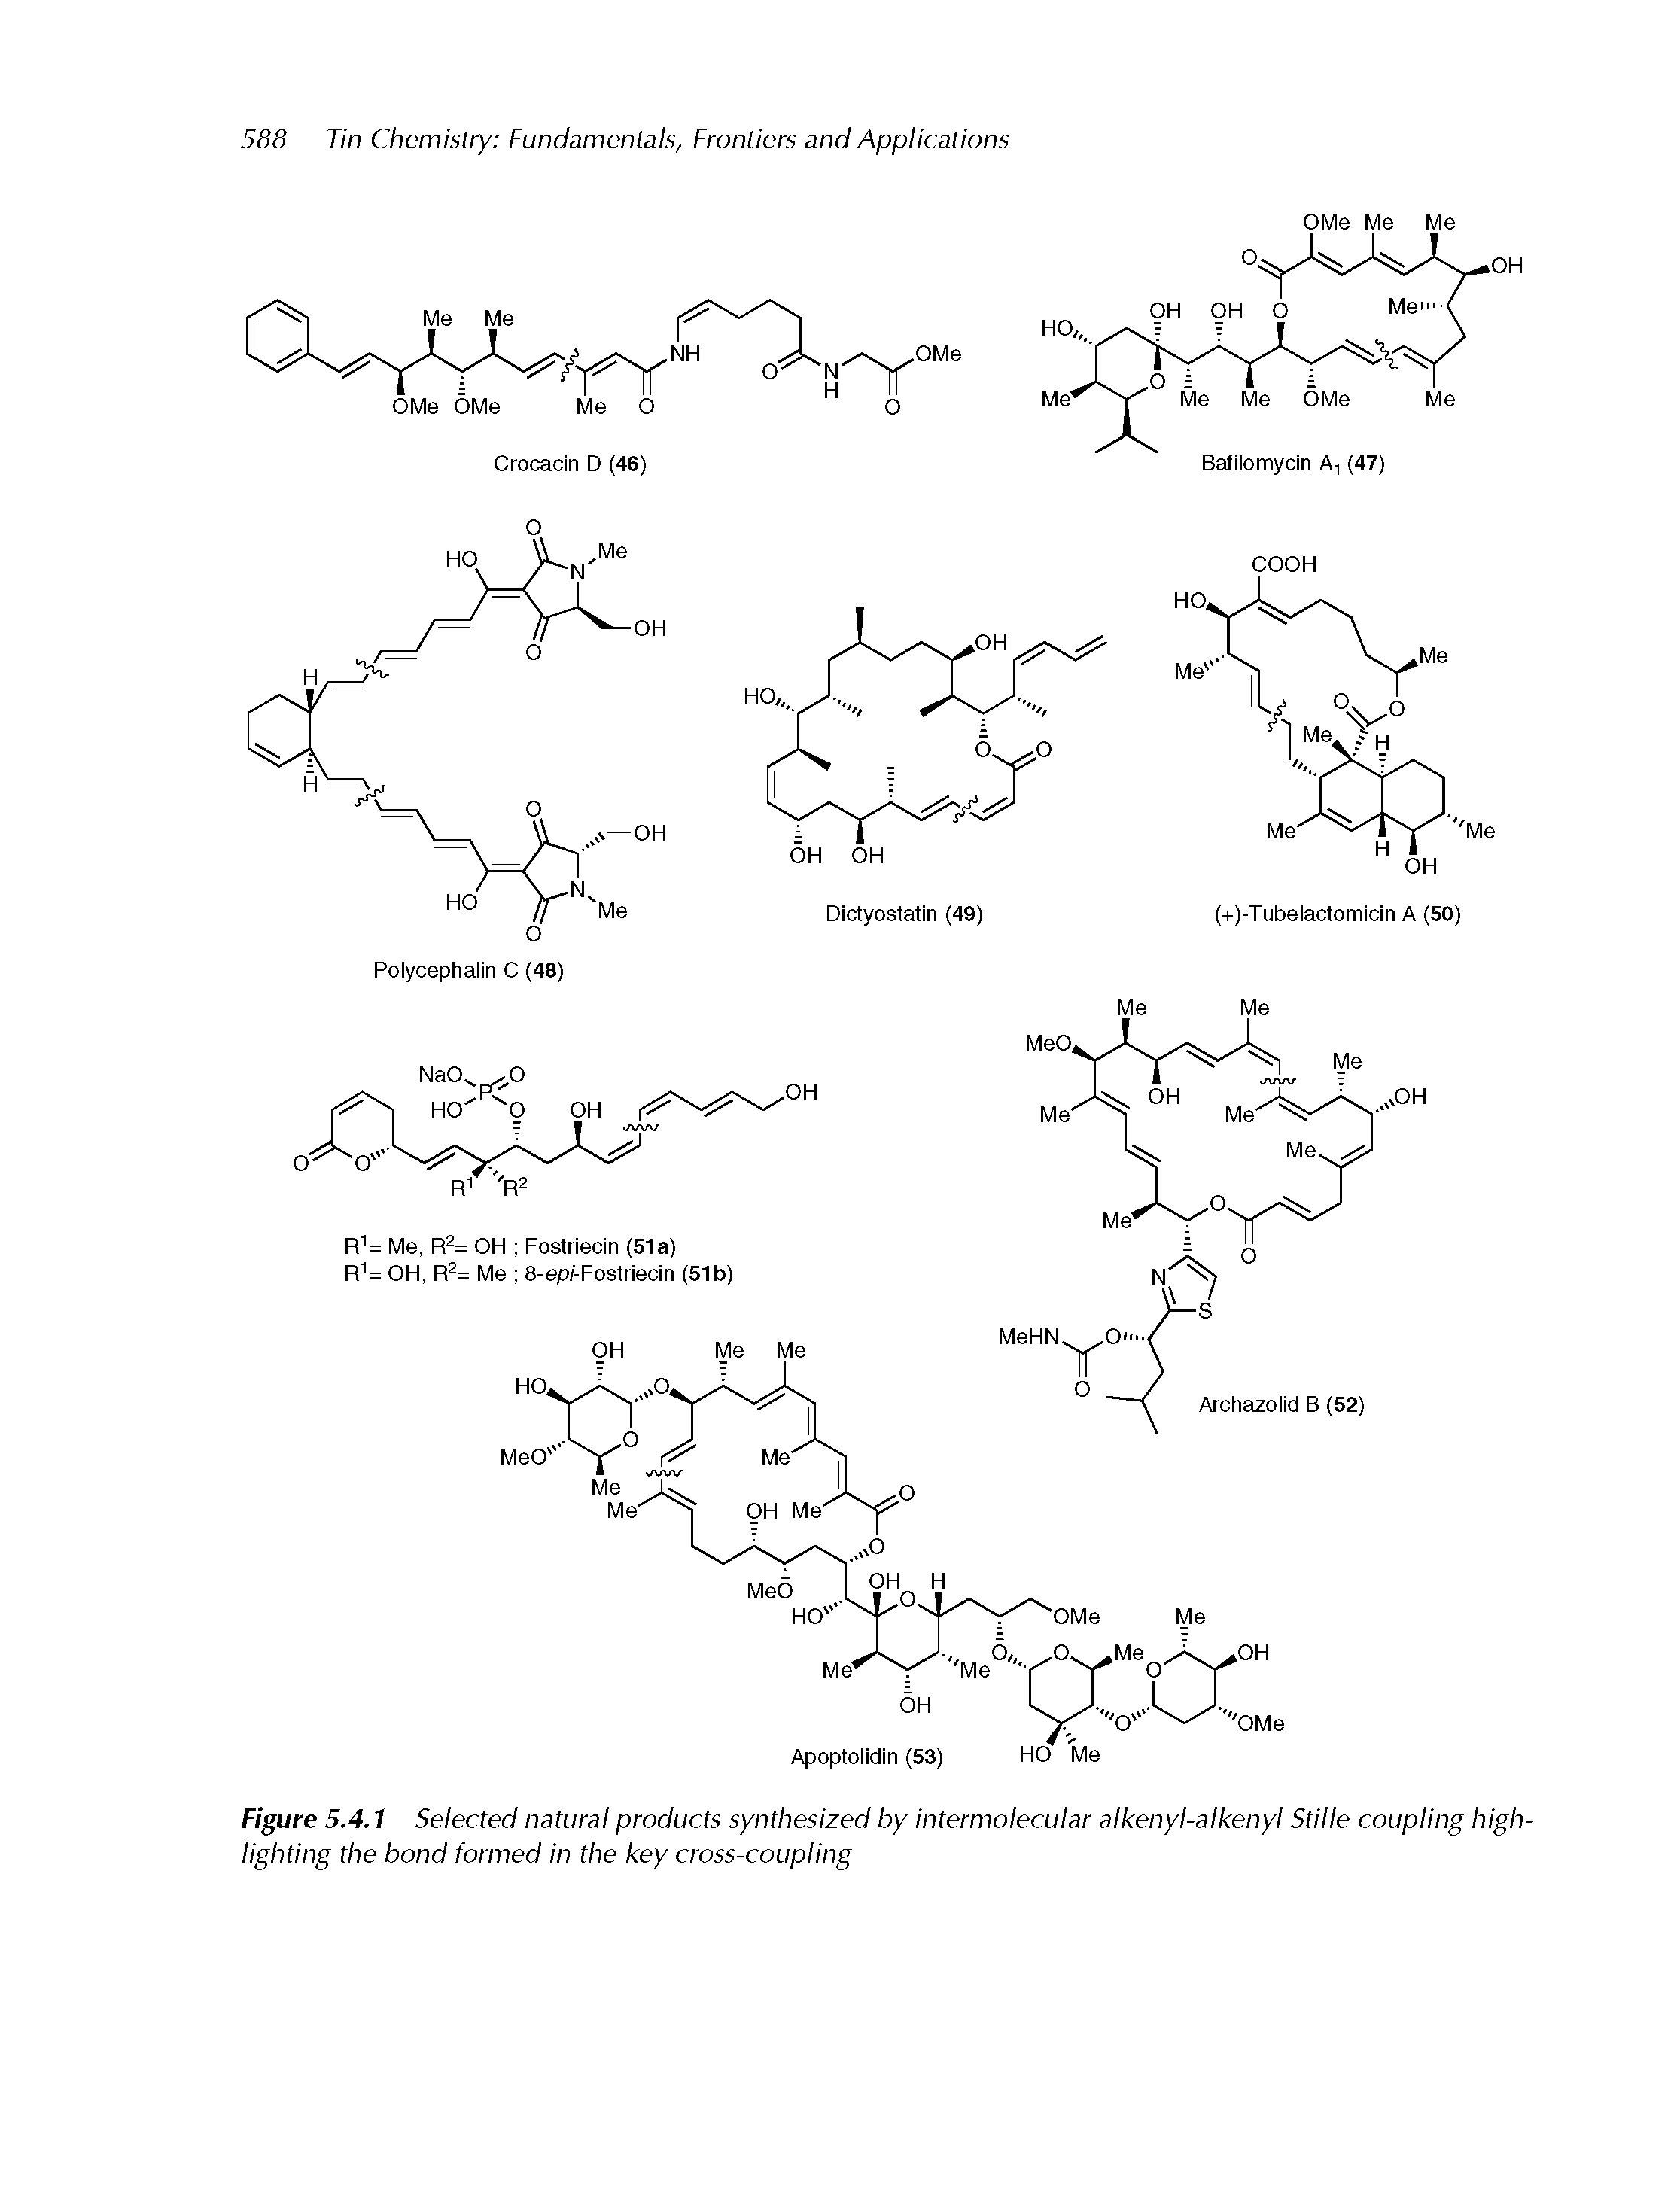 Figure 5.4.1 Selected natural products synthesized by Intermolecular alkenyl-alkenyl Stille coupling highlighting the bond formed In the key cross-coupling...